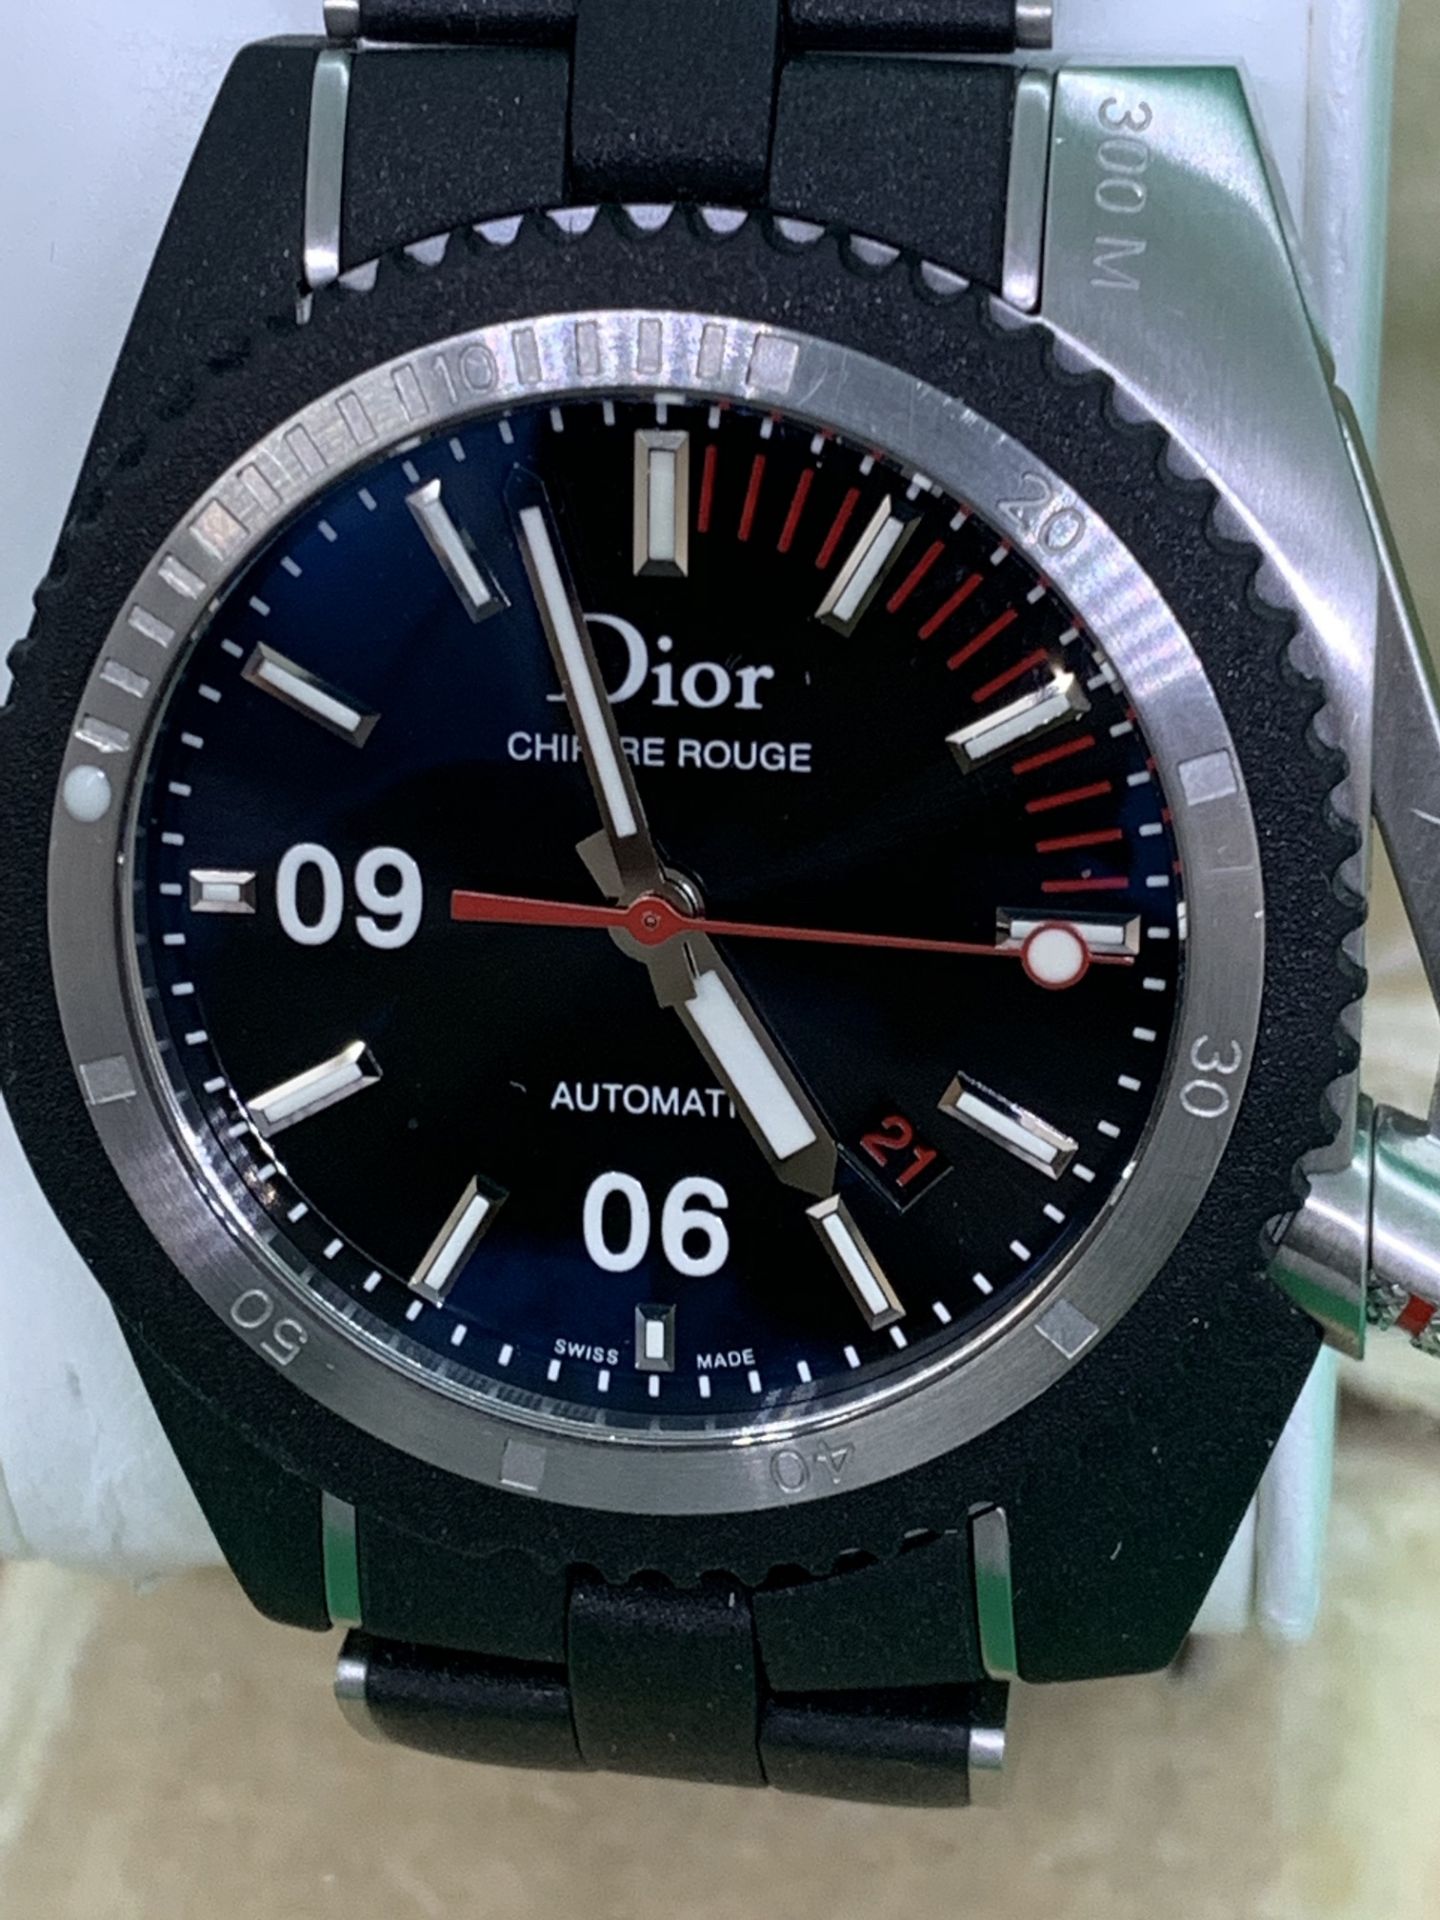 DIOR CHIFFRE ROUGE DO2 WATCH